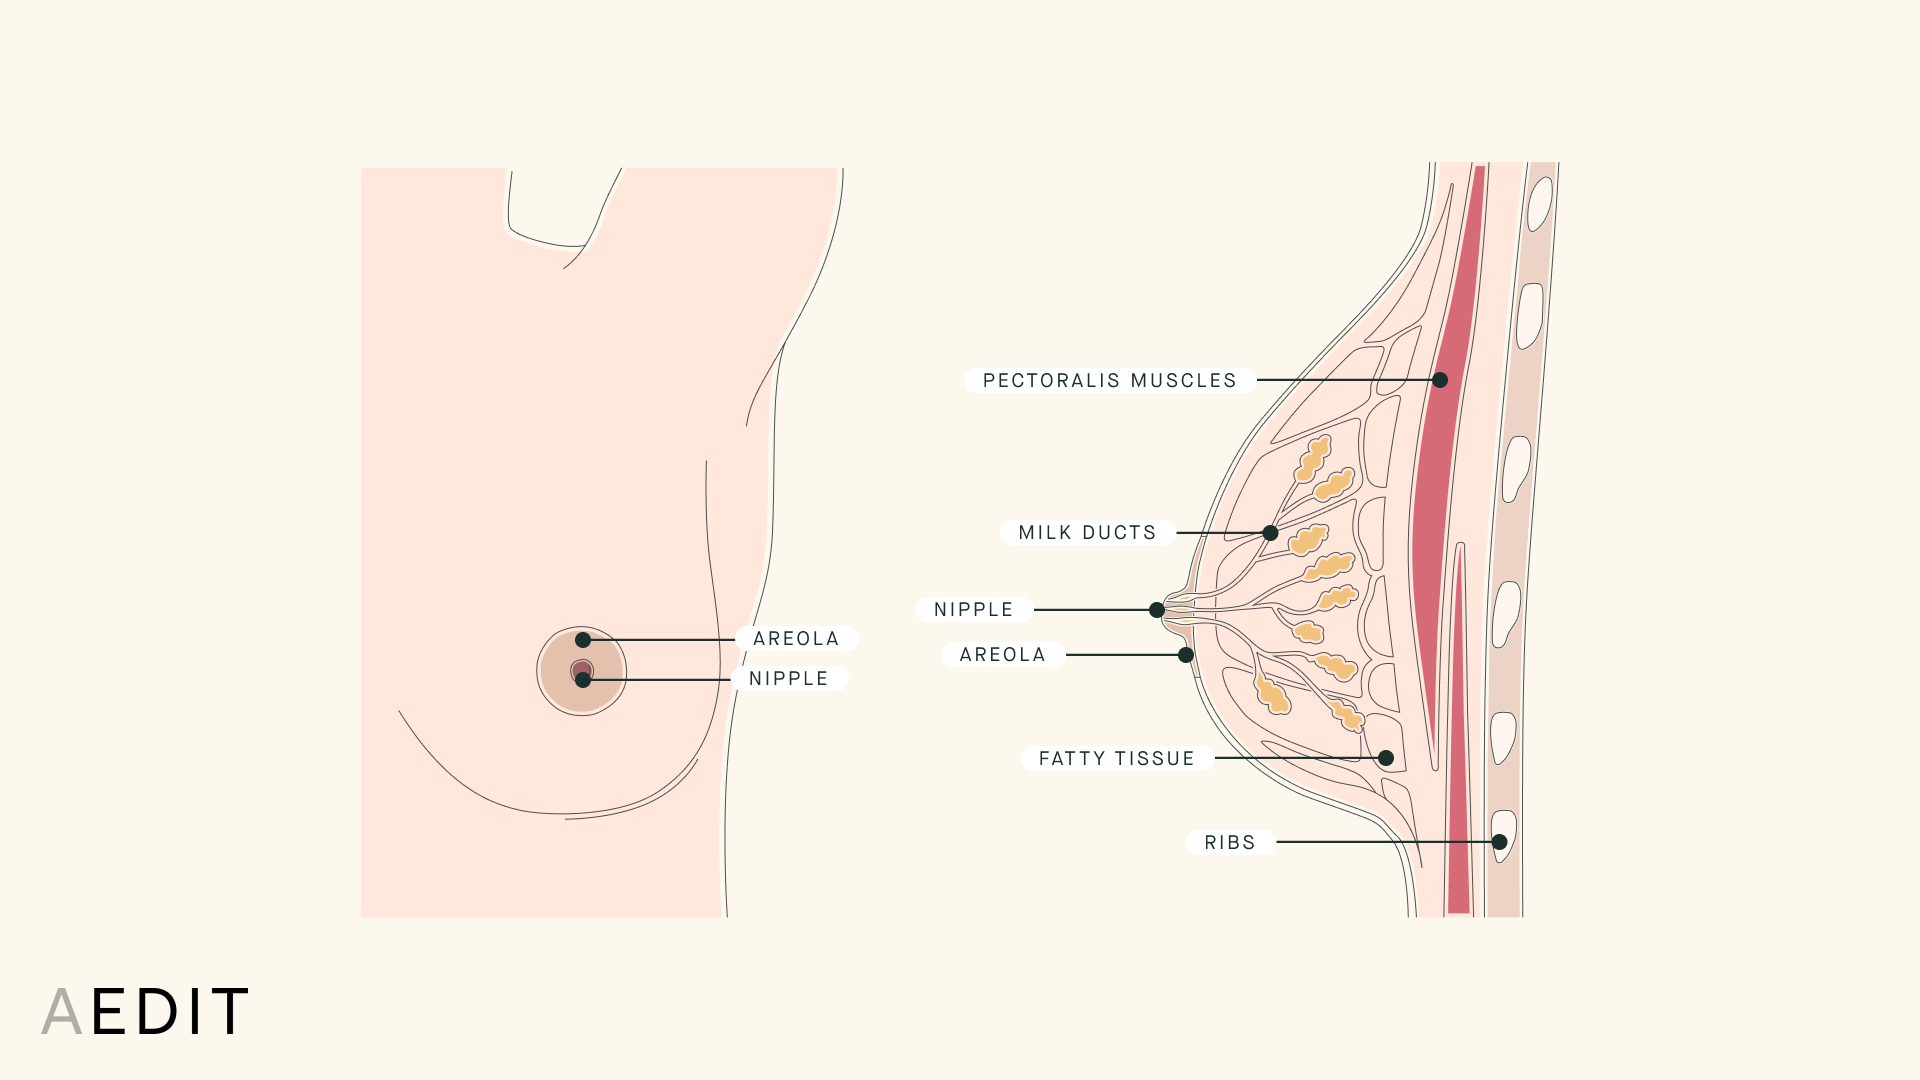 Breast Shape & Size Overview - Causes, Treatment Options, and More